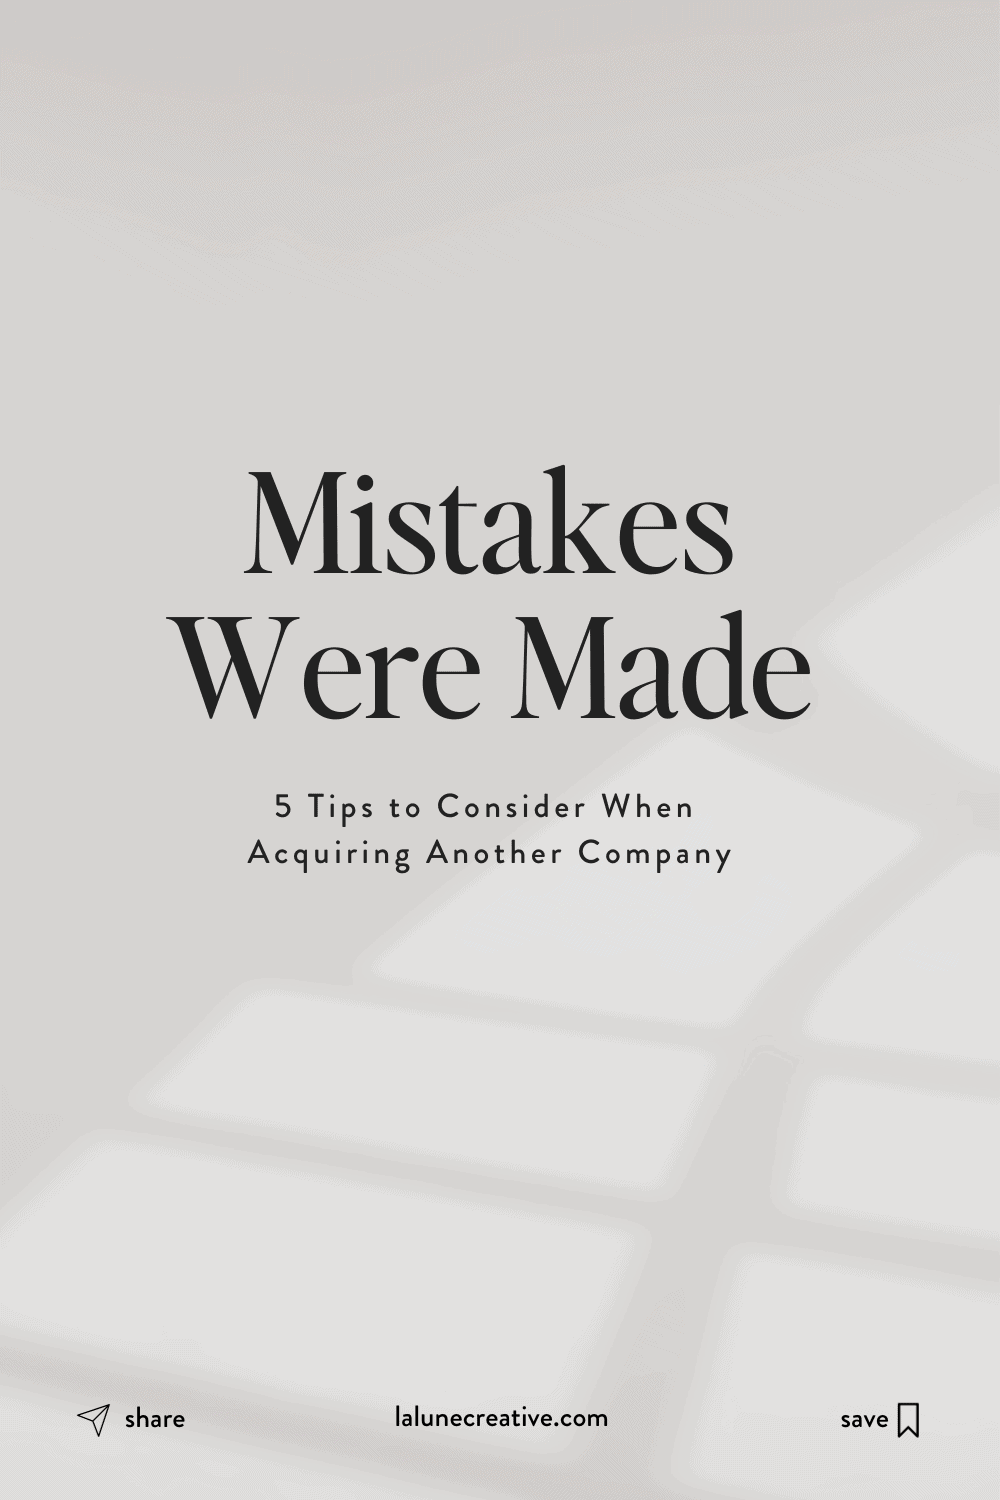 Mistakes Were Made: 5 Tips to Consider When Acquiring Another Company